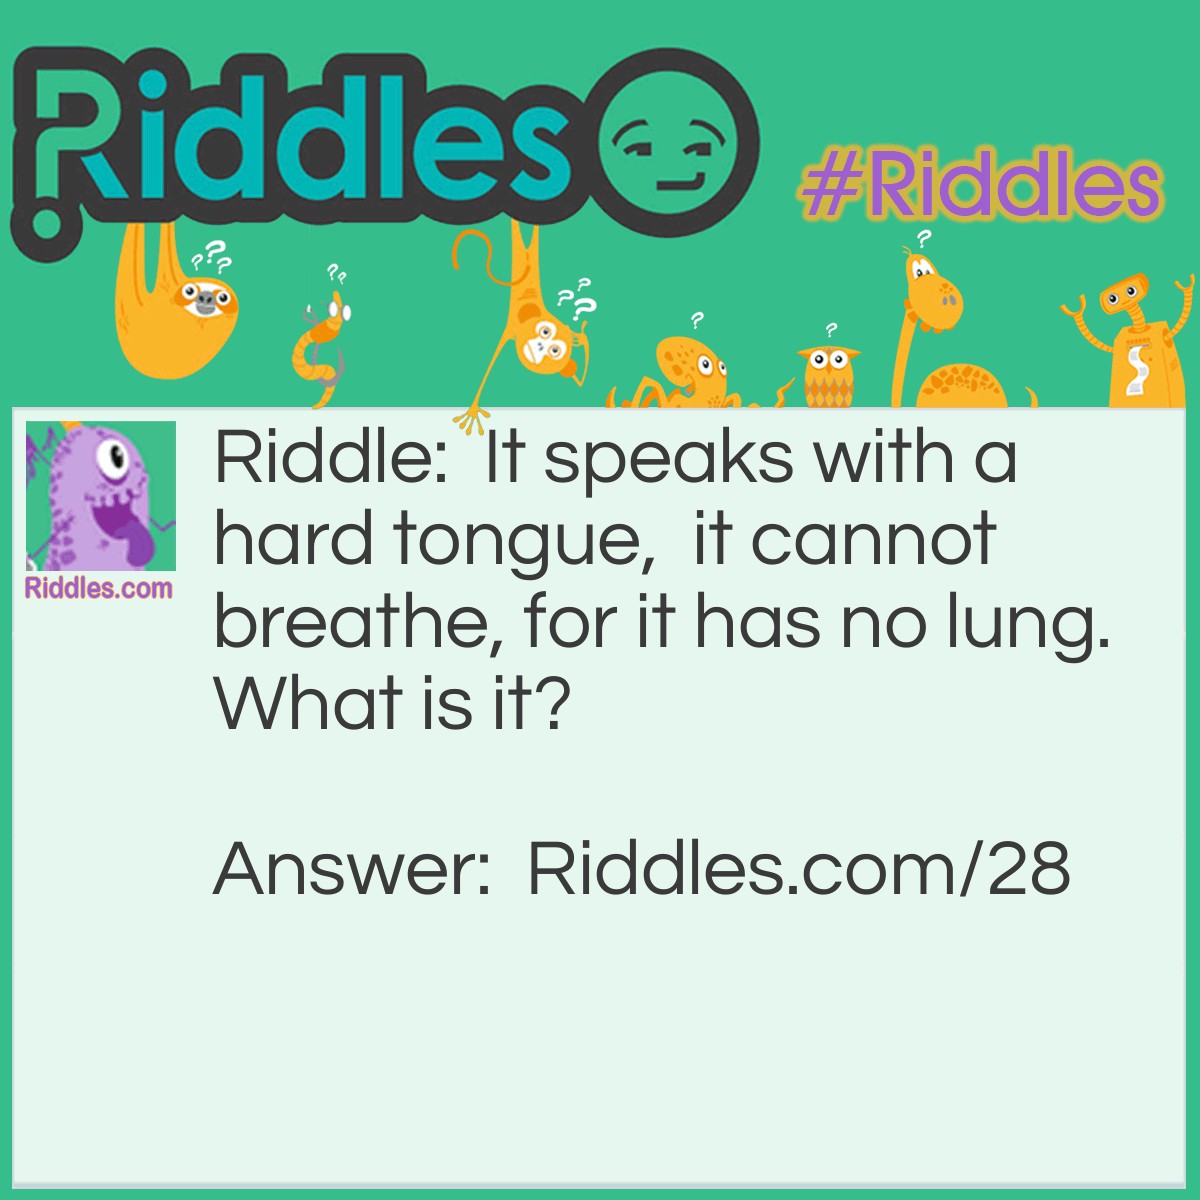 Riddle: It speaks with a <a href="/difficult-riddles">hard</a> tongue, it cannot breathe, for it has no lungs. What is it? Answer: A Bell.